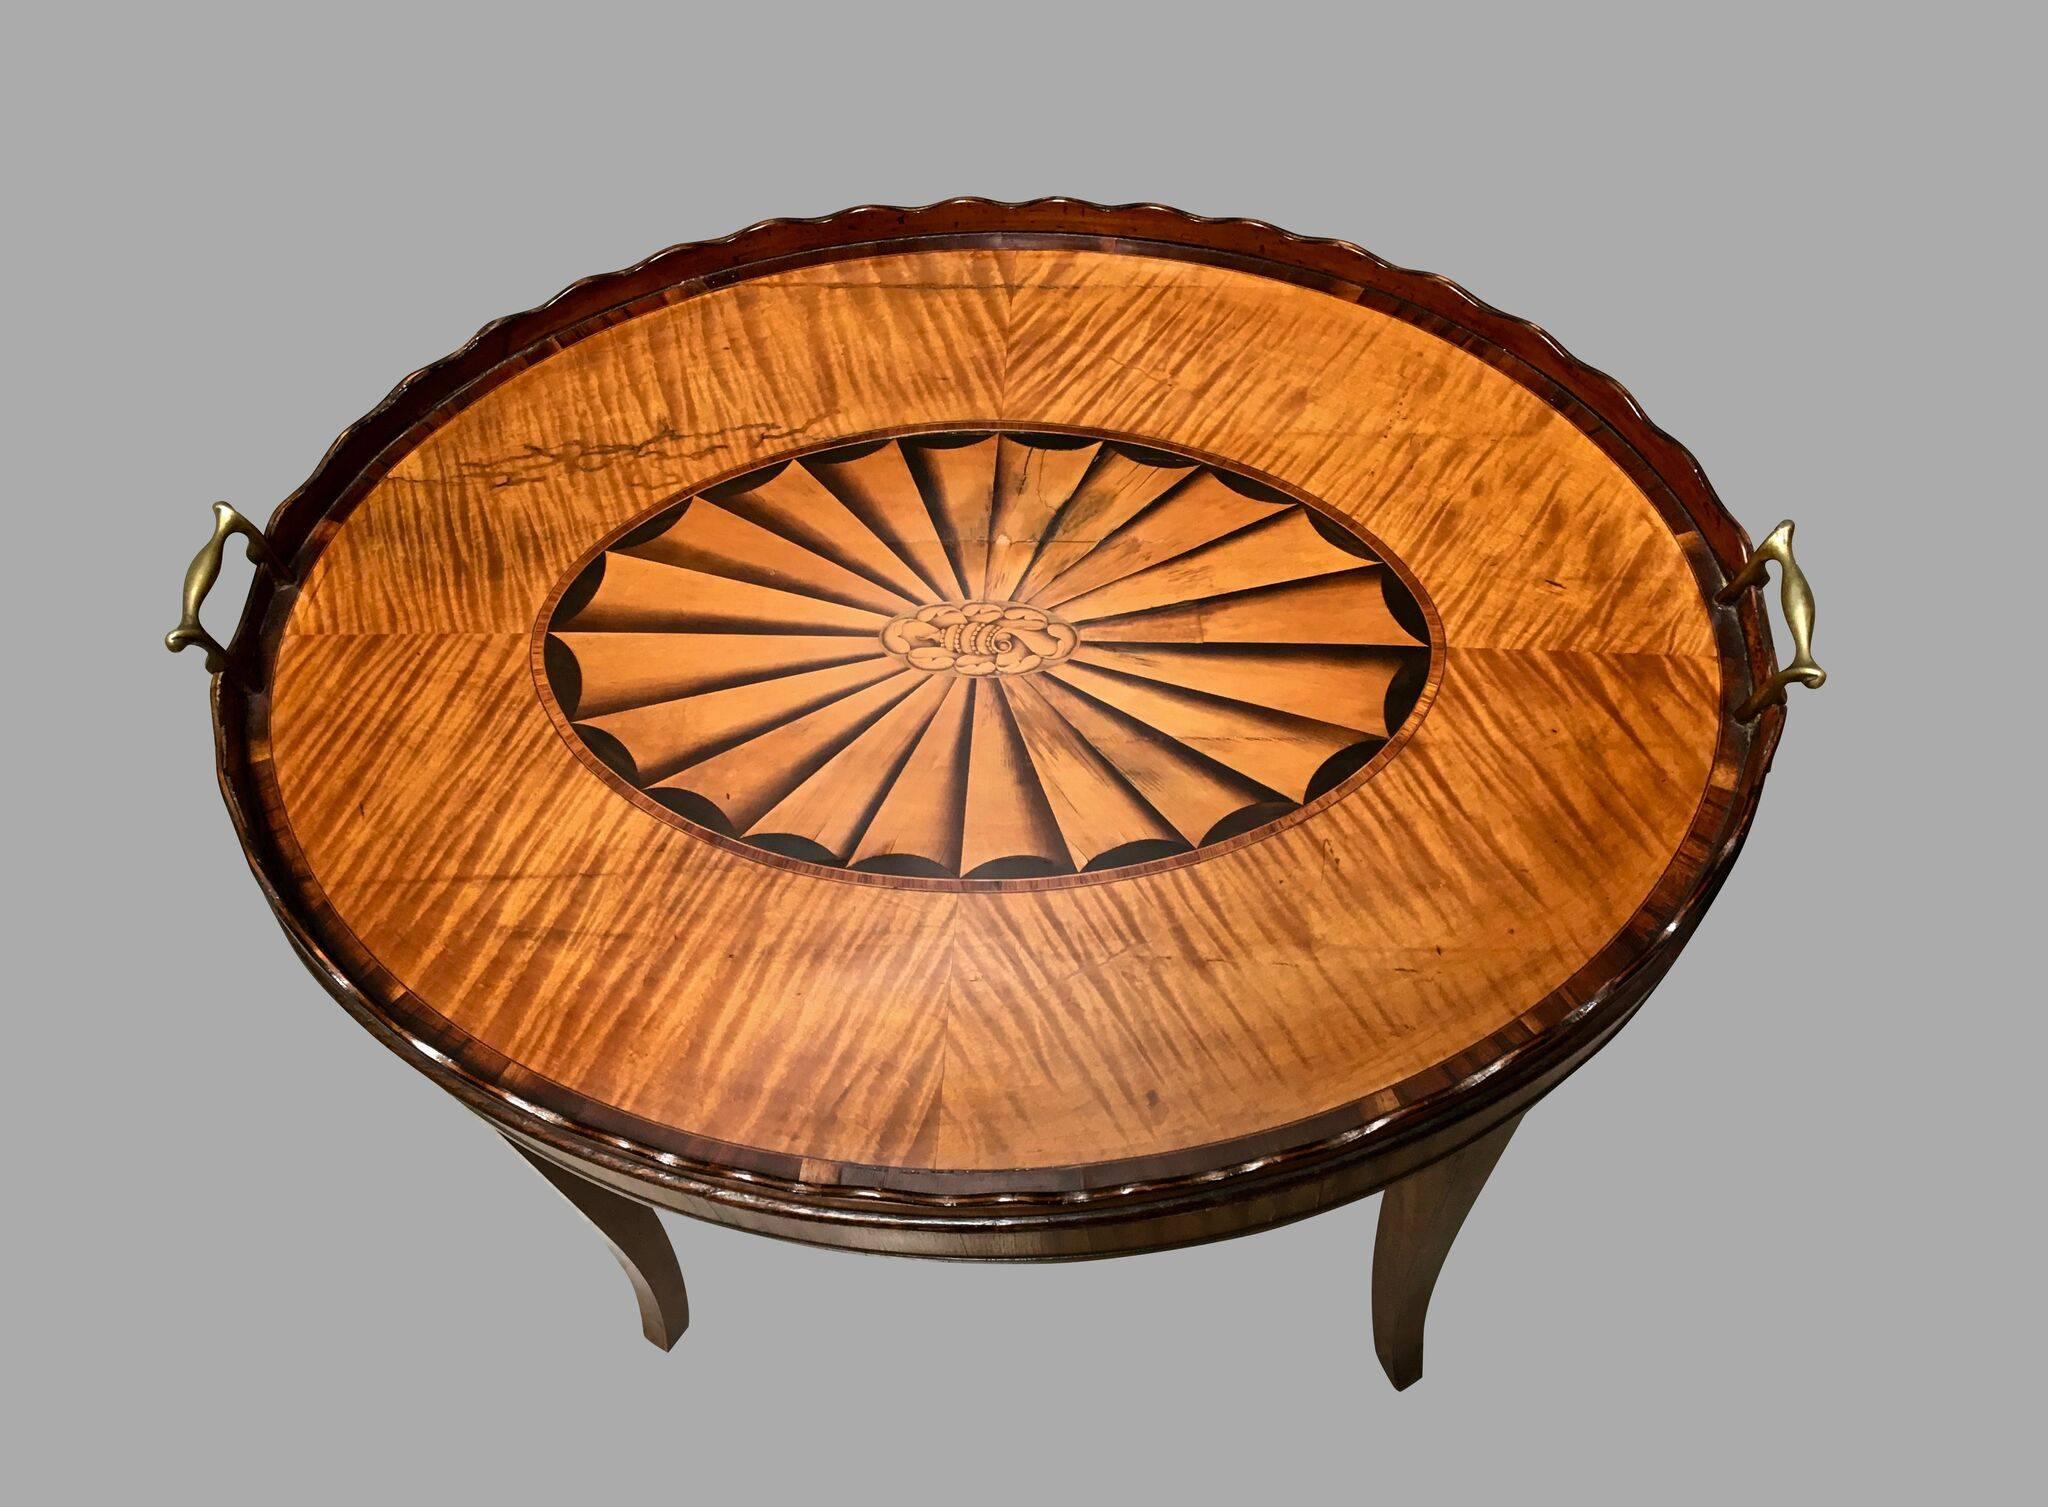 A fine quality Georgian inlaid satinwood tray with a beautifully rendered central inlaid fan medallion framed by a satinwood surround, with a scalloped edge, now supported on a custom stand of a later date. Tray, circa 1790.